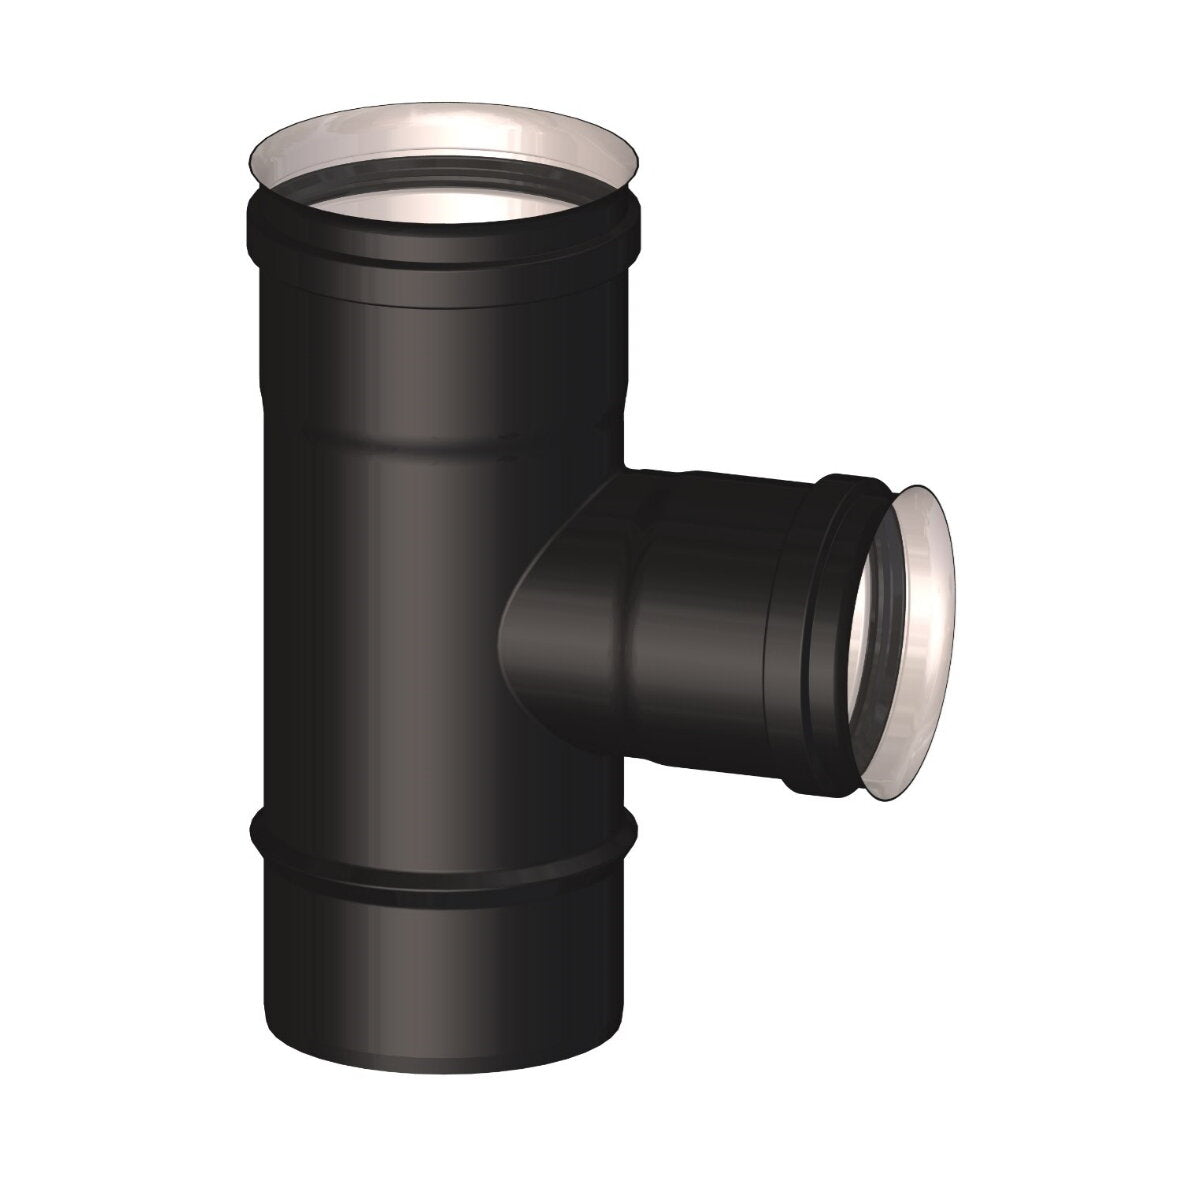 Tee 90° F/F/M diam. 100 mm reduced to diam. 80 mm F for pellet stove and pellet boiler fume exhaust